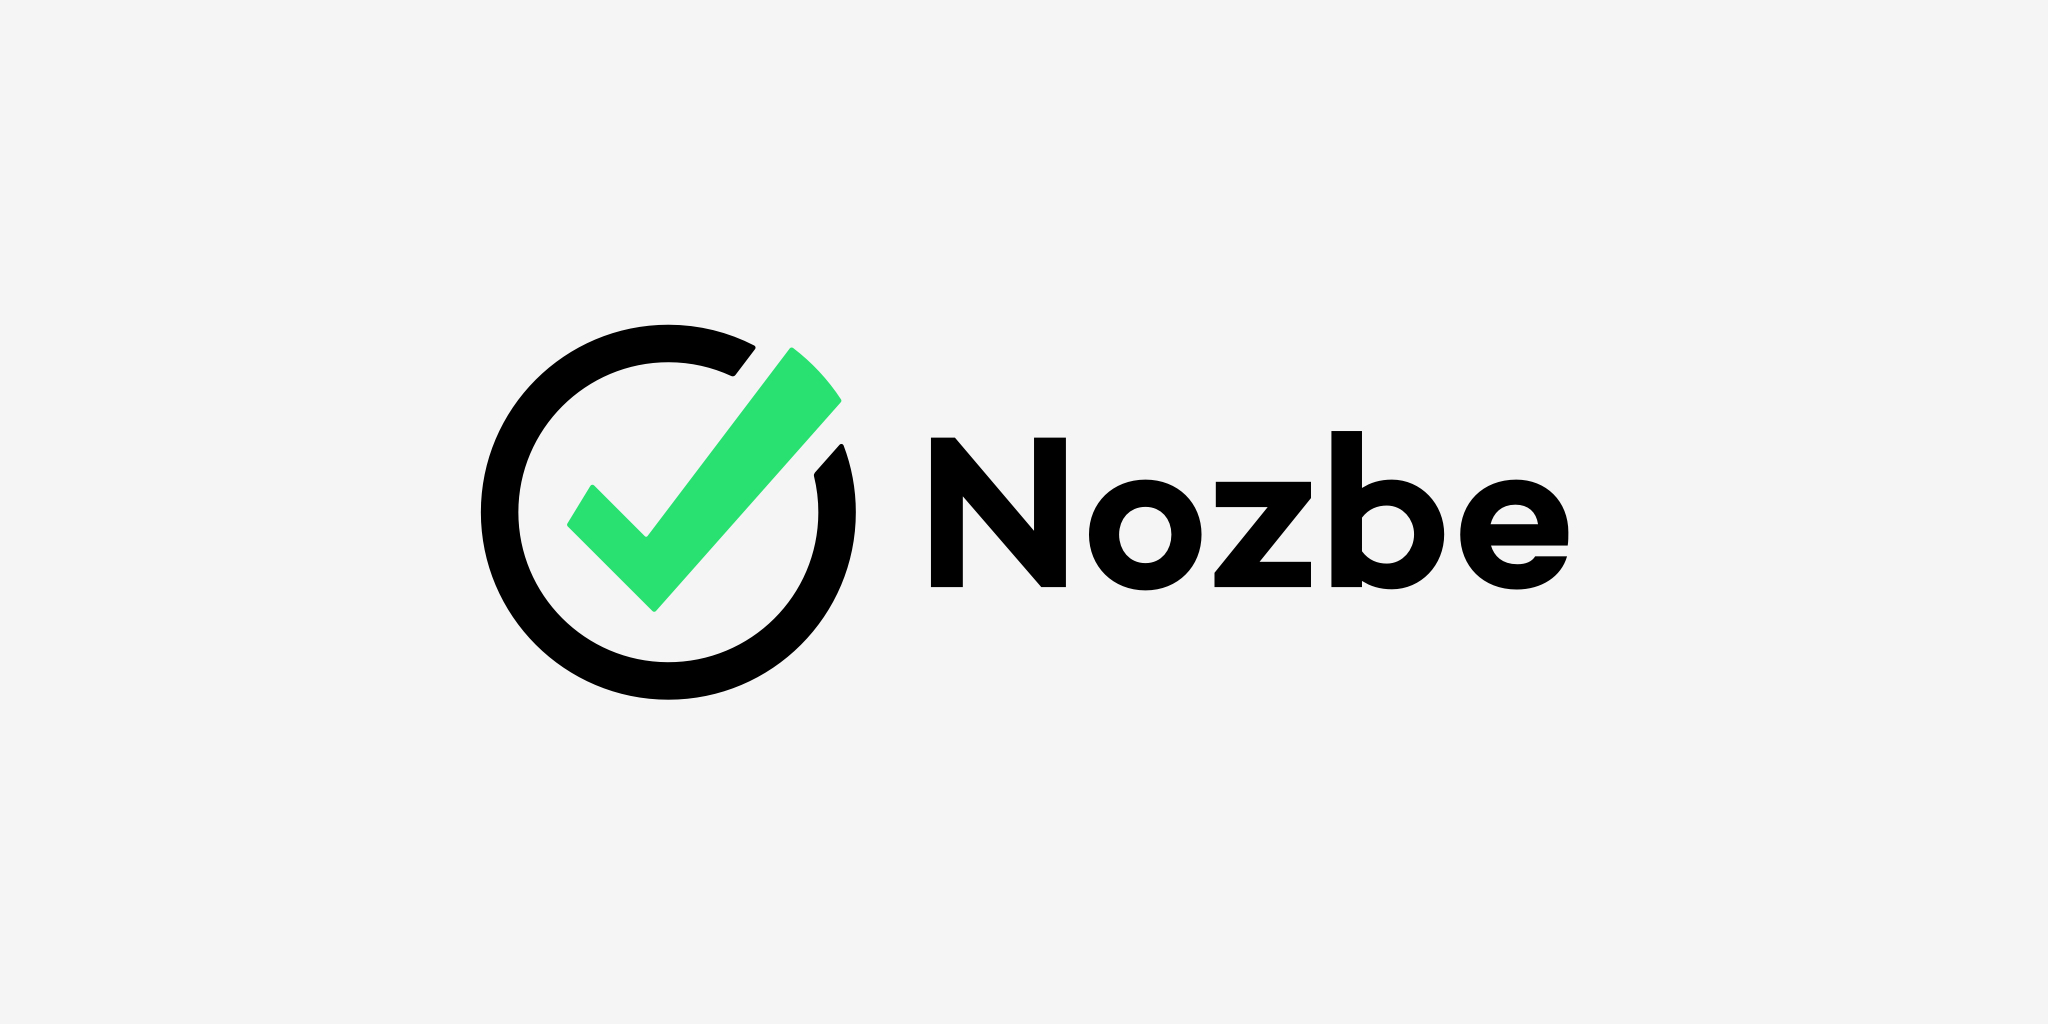 Preview image of website "Nozbe Personal Help"